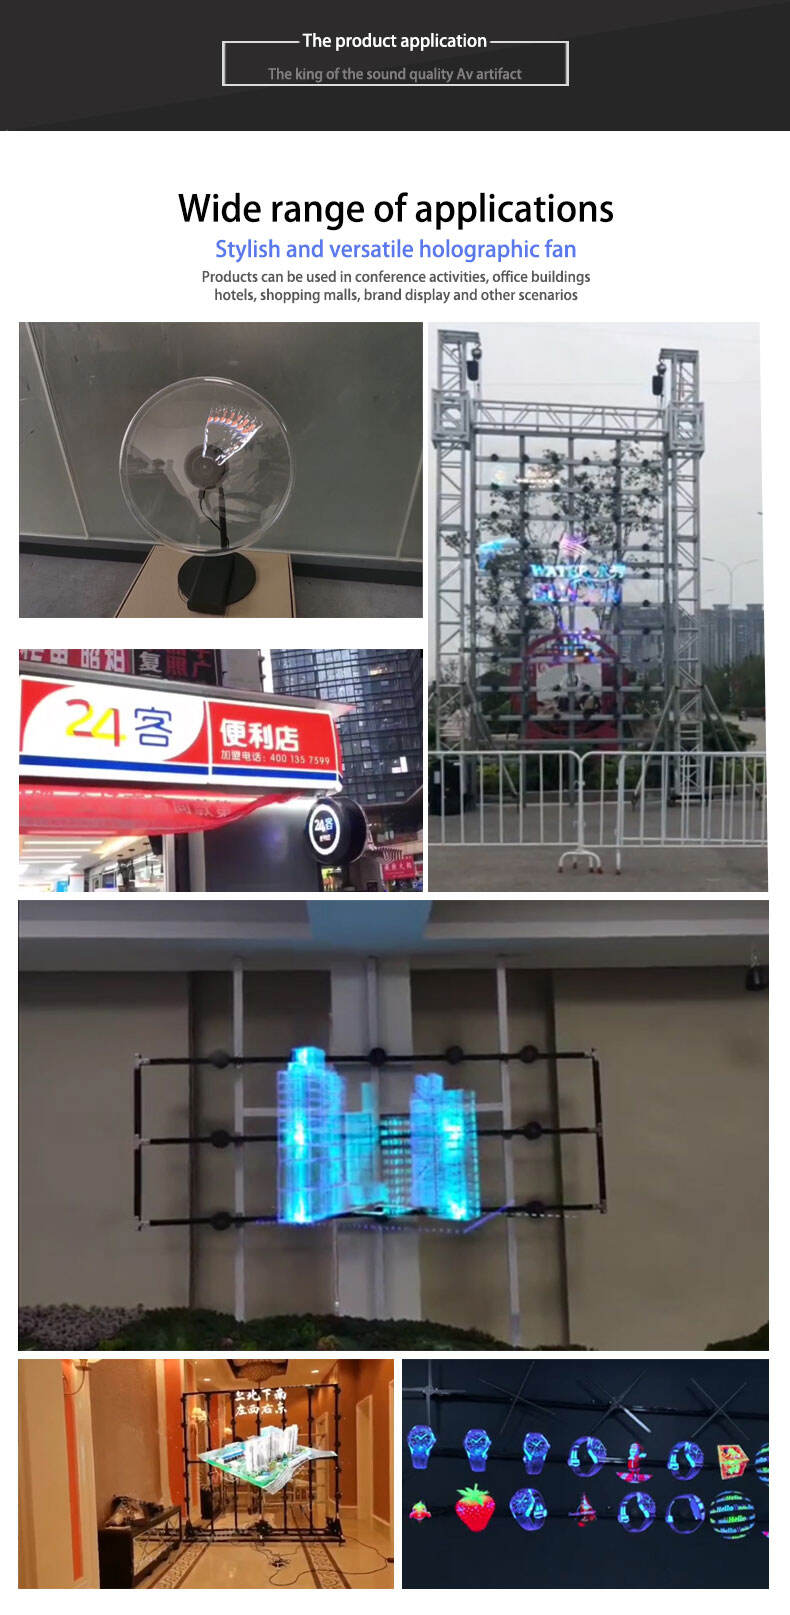 New Large 150cm Transparent Hologram Circular TV 2880 LED Projector Advertising Equipment with 3D LED Fan details